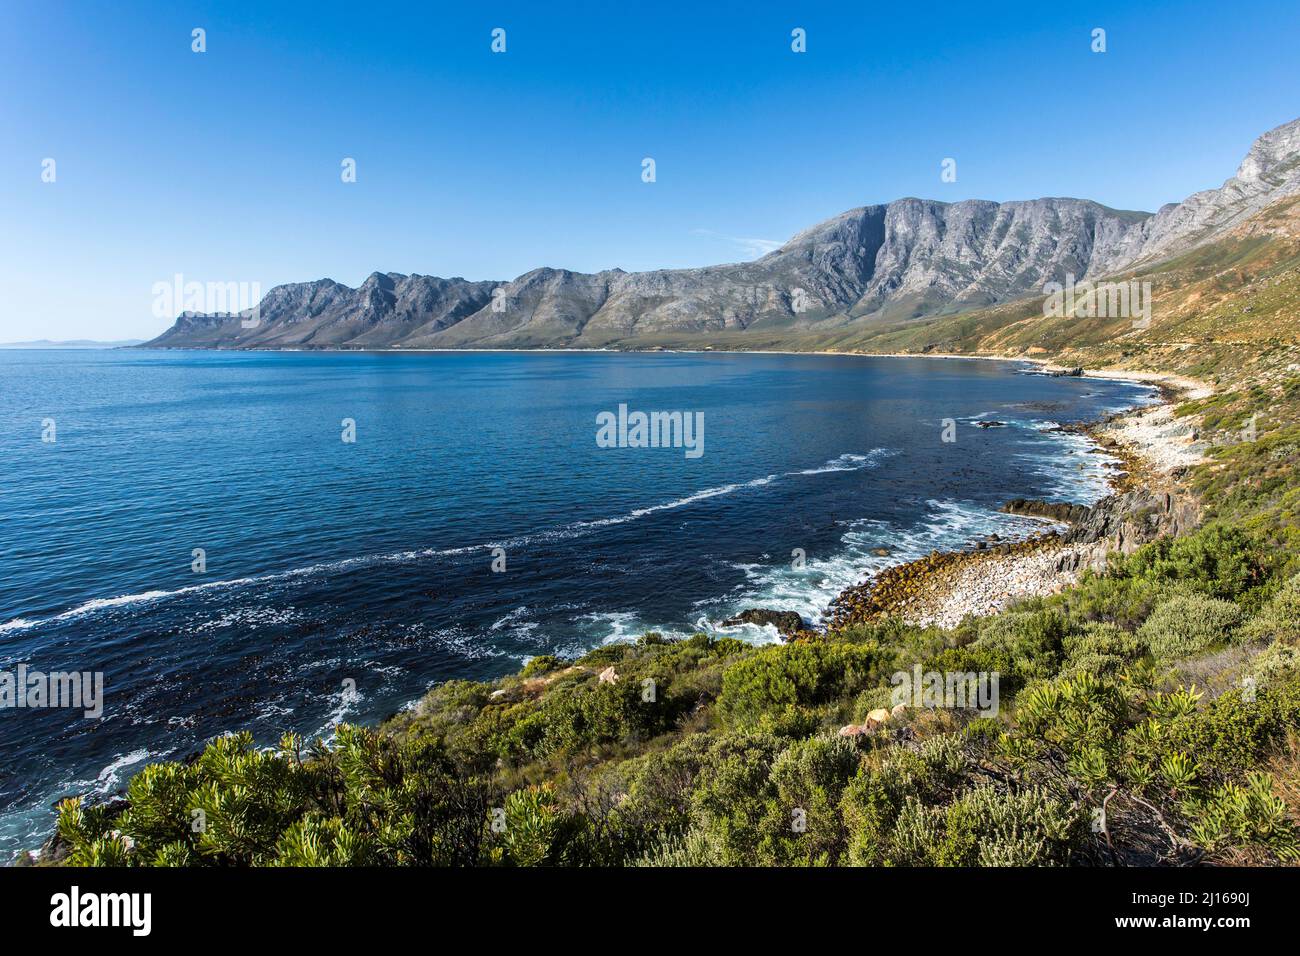 Scenic ocean shoreline of a small bay surrounded with mountains and Cape Fynbos plants with a blue sky Stock Photo